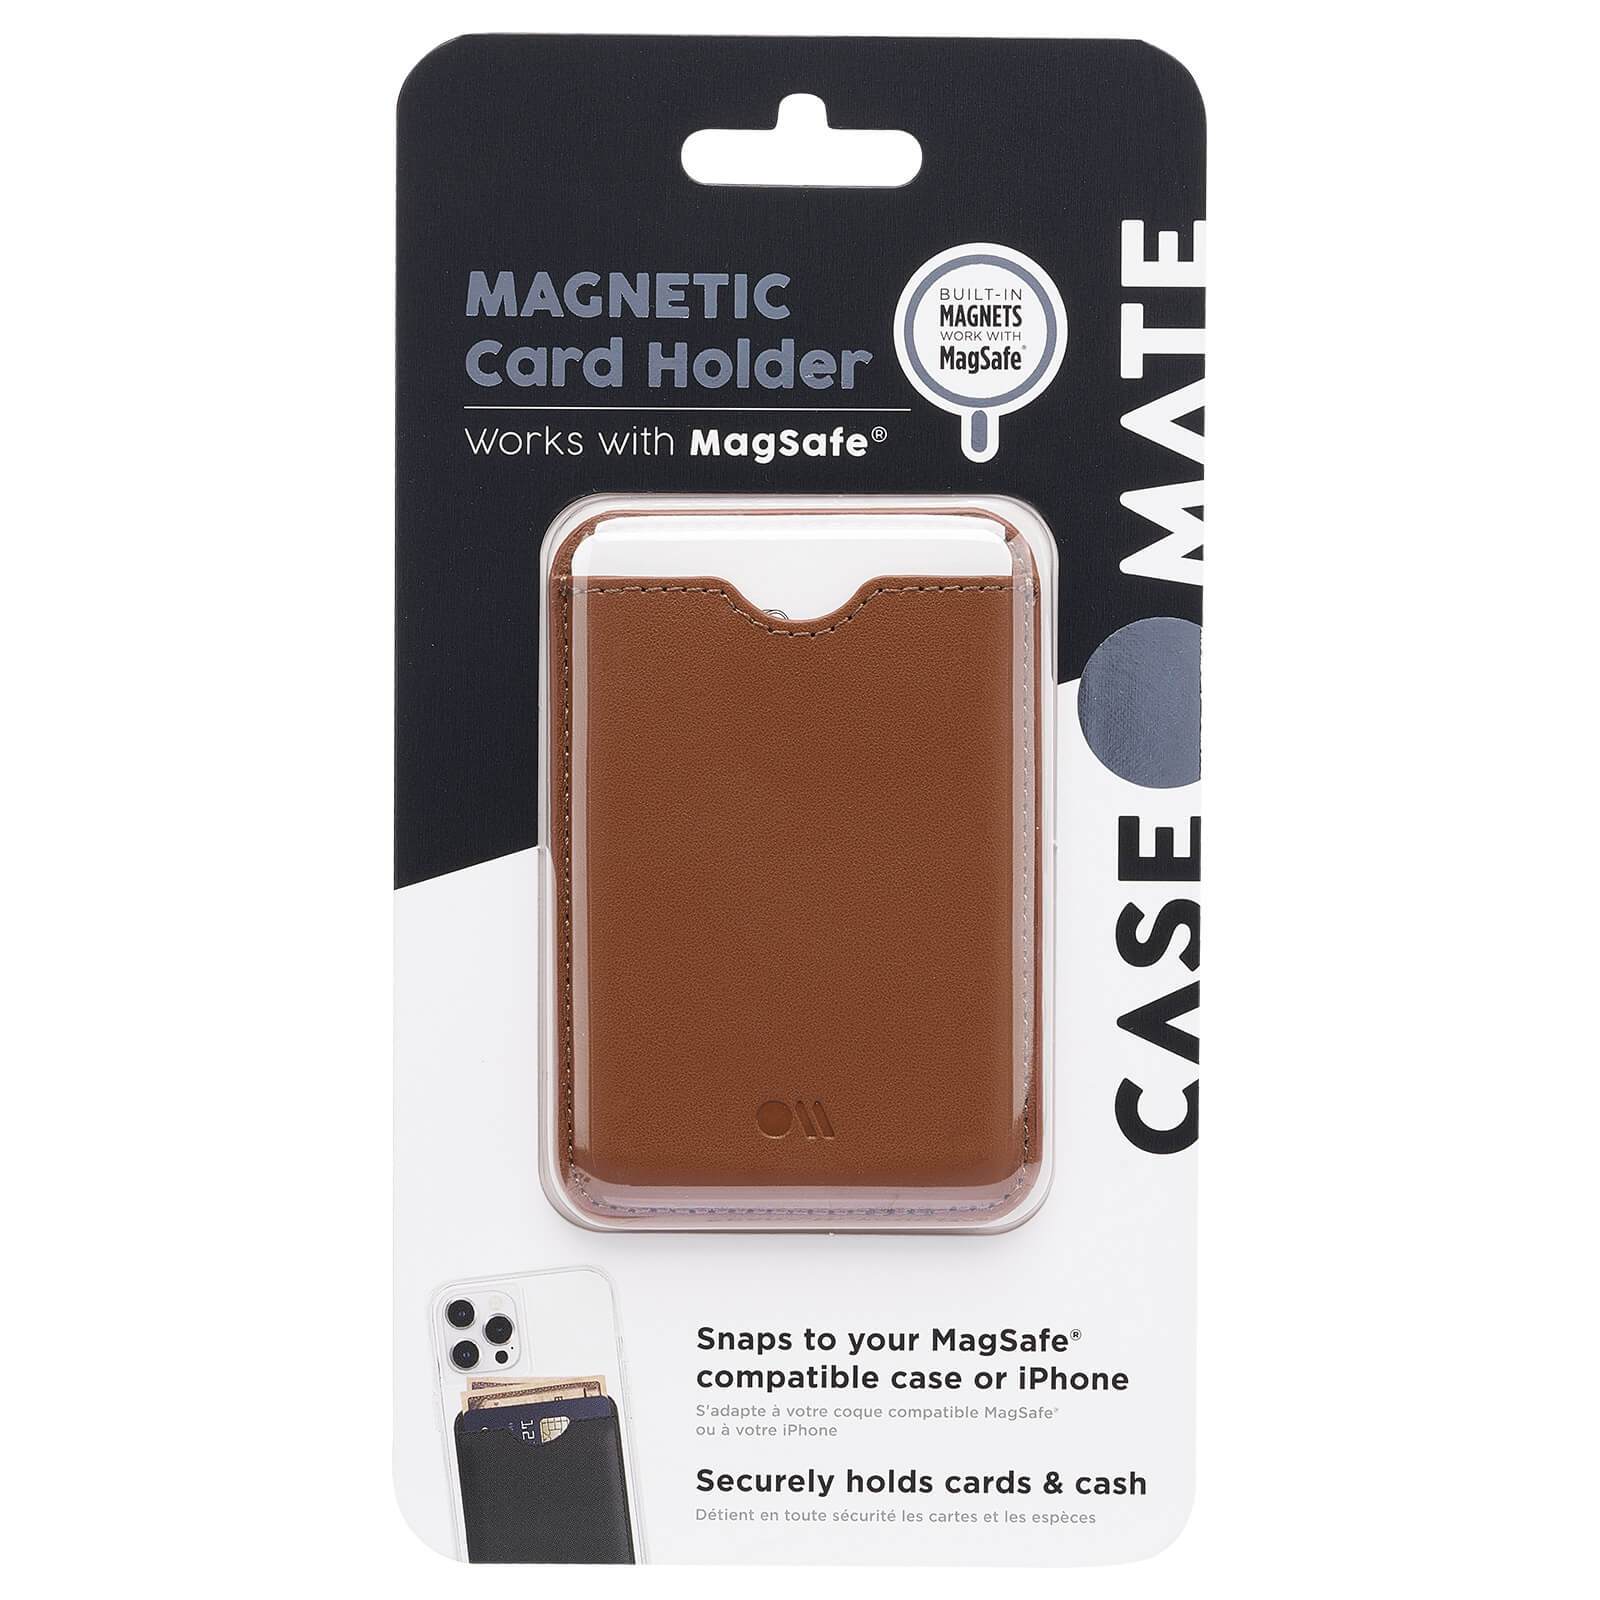 Magnetic Card Holder Works with MagSafe. Snaps to your MagSafe compatible case or iPhone. Securely holds cards & cash. color::Cognac